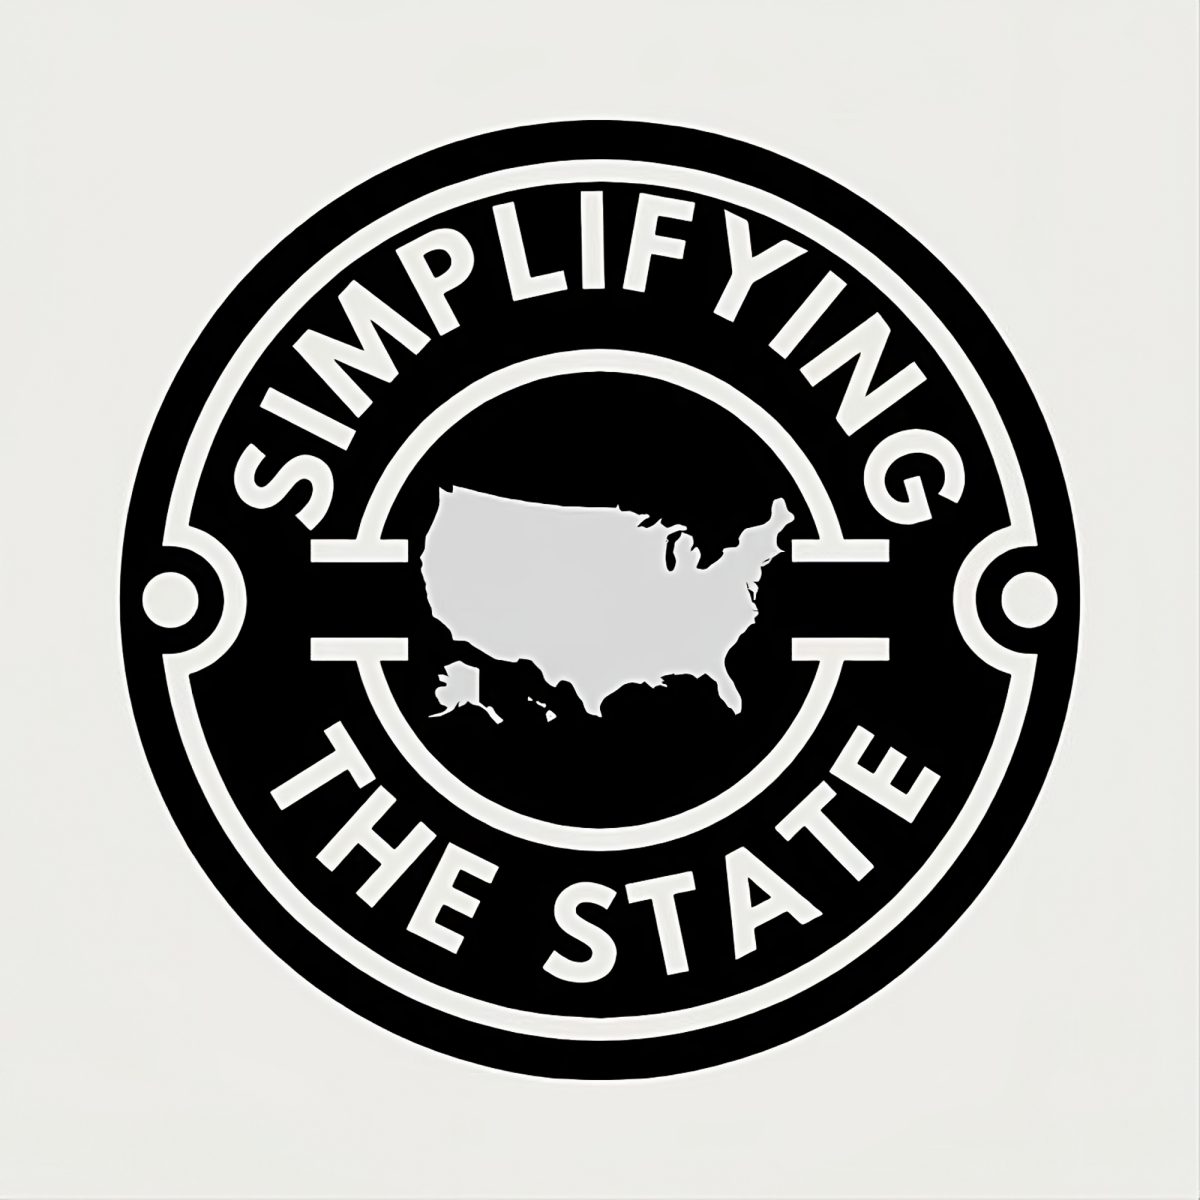 Simplifying The State Episode 7